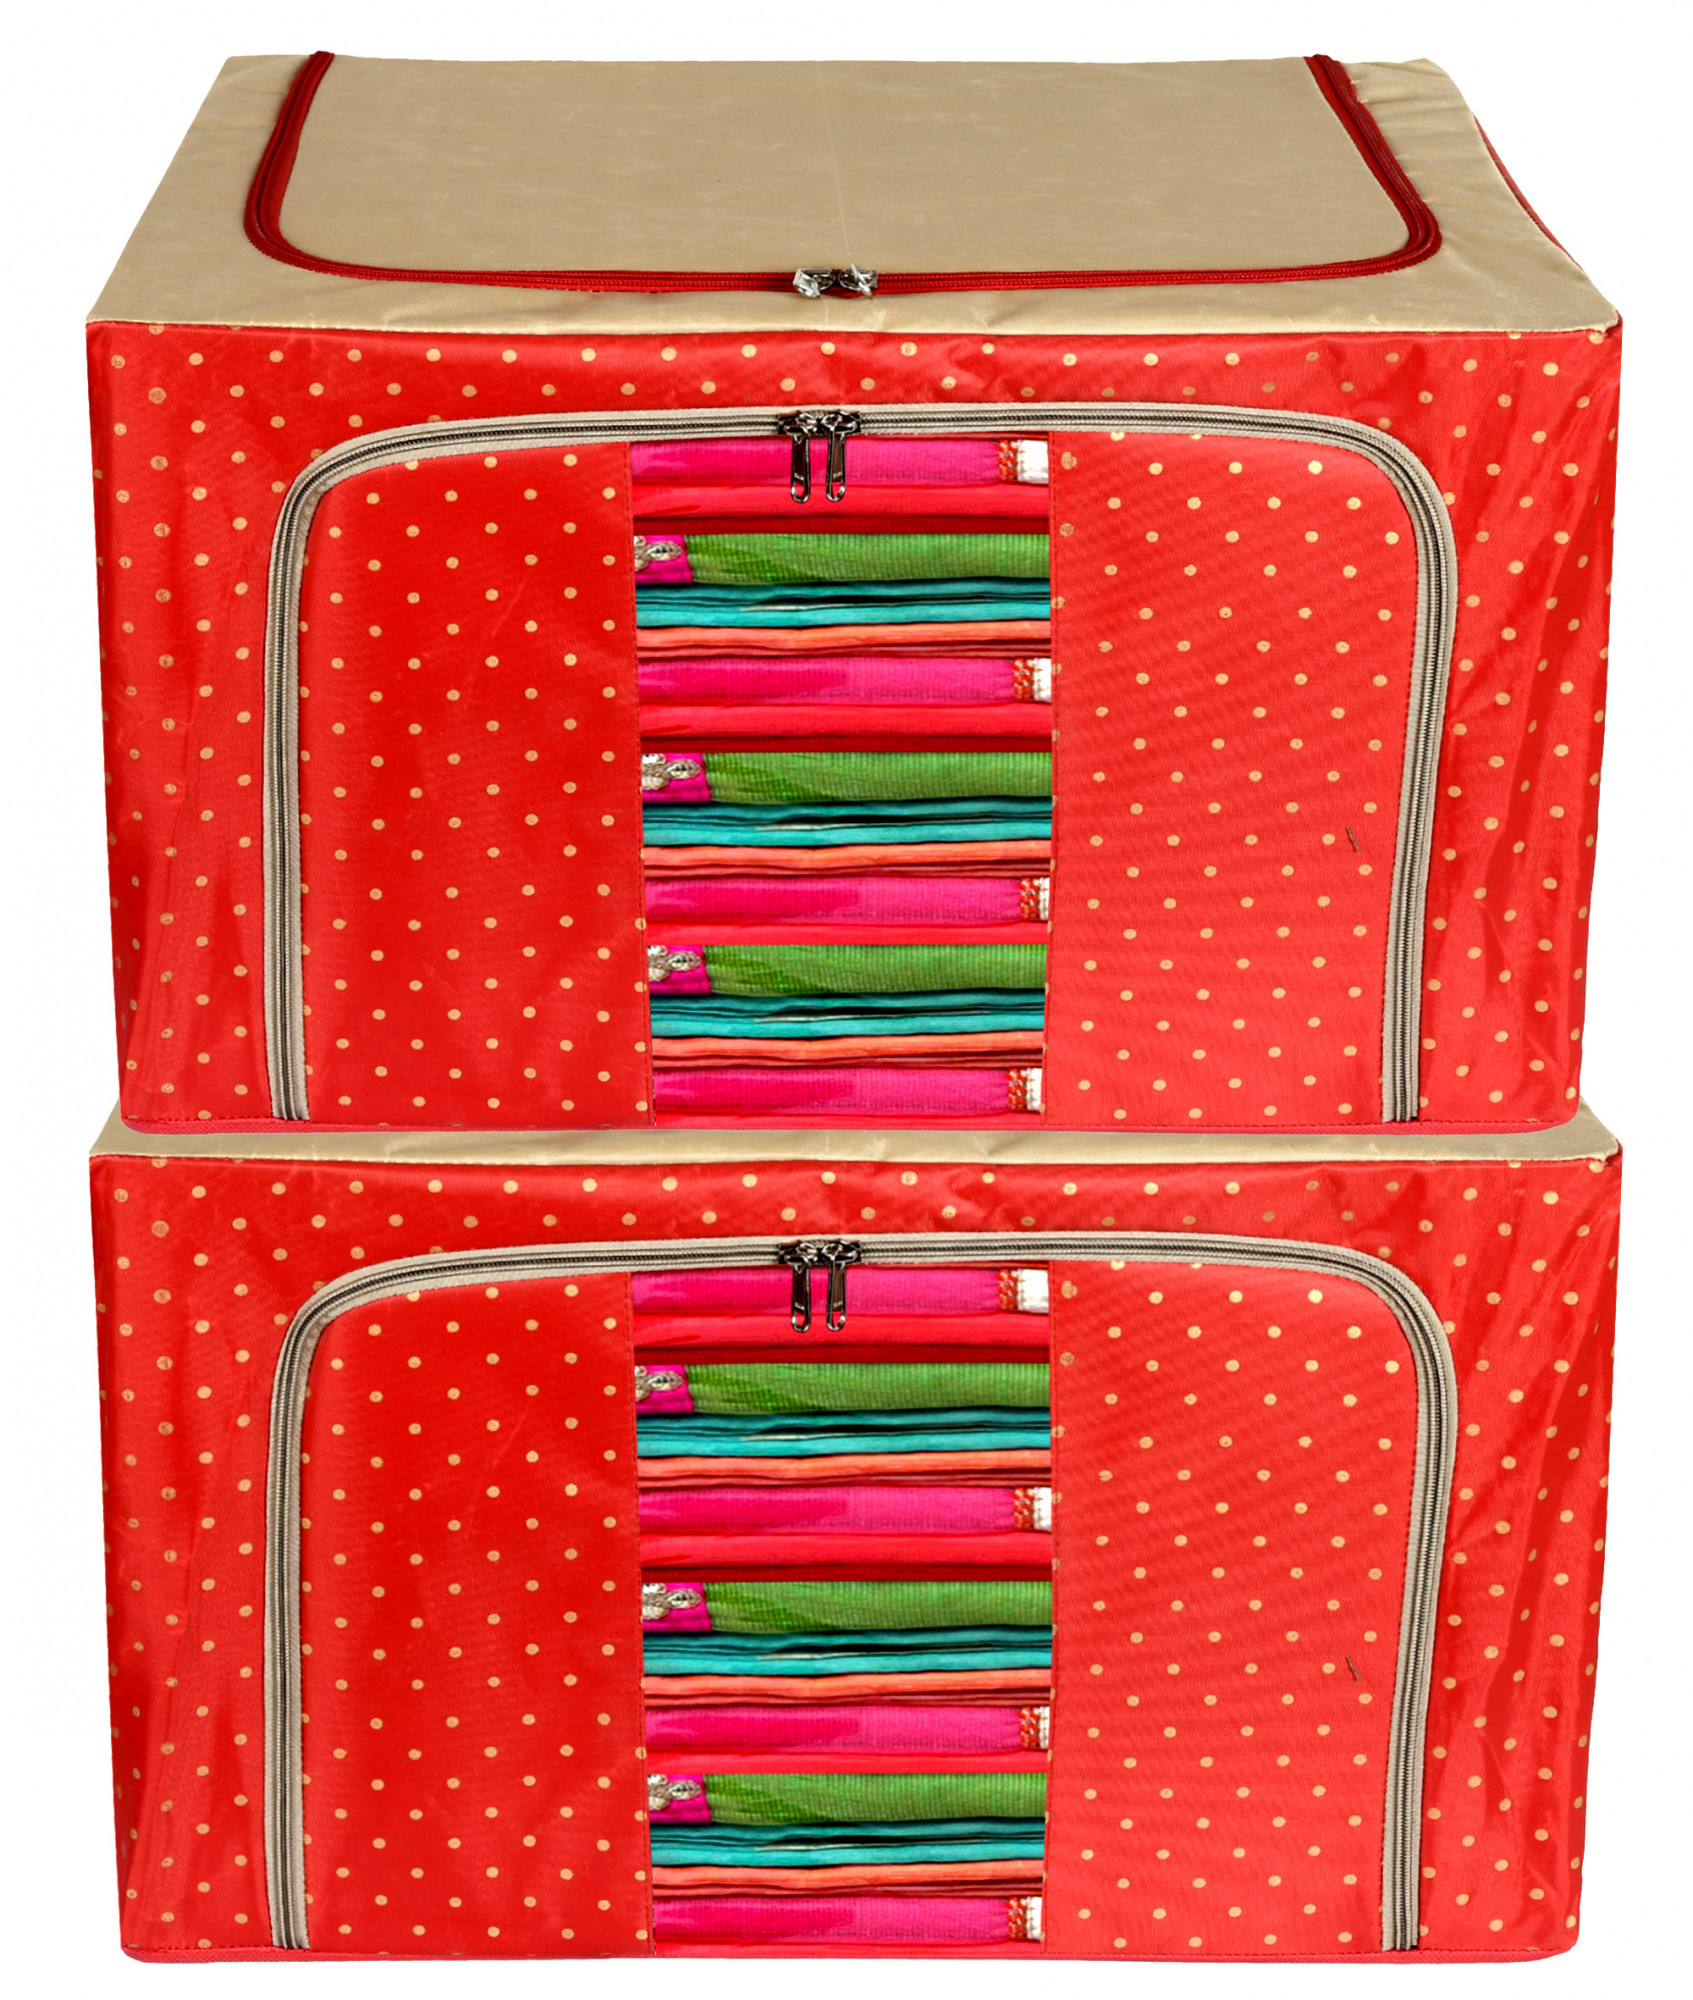 Kuber Industries Dot Printed Steel Frame Storage Box/Organizer For Clothing, Blankets, Bedding With Clear Window, 66Ltr. (Red & Brown)-44KM0245